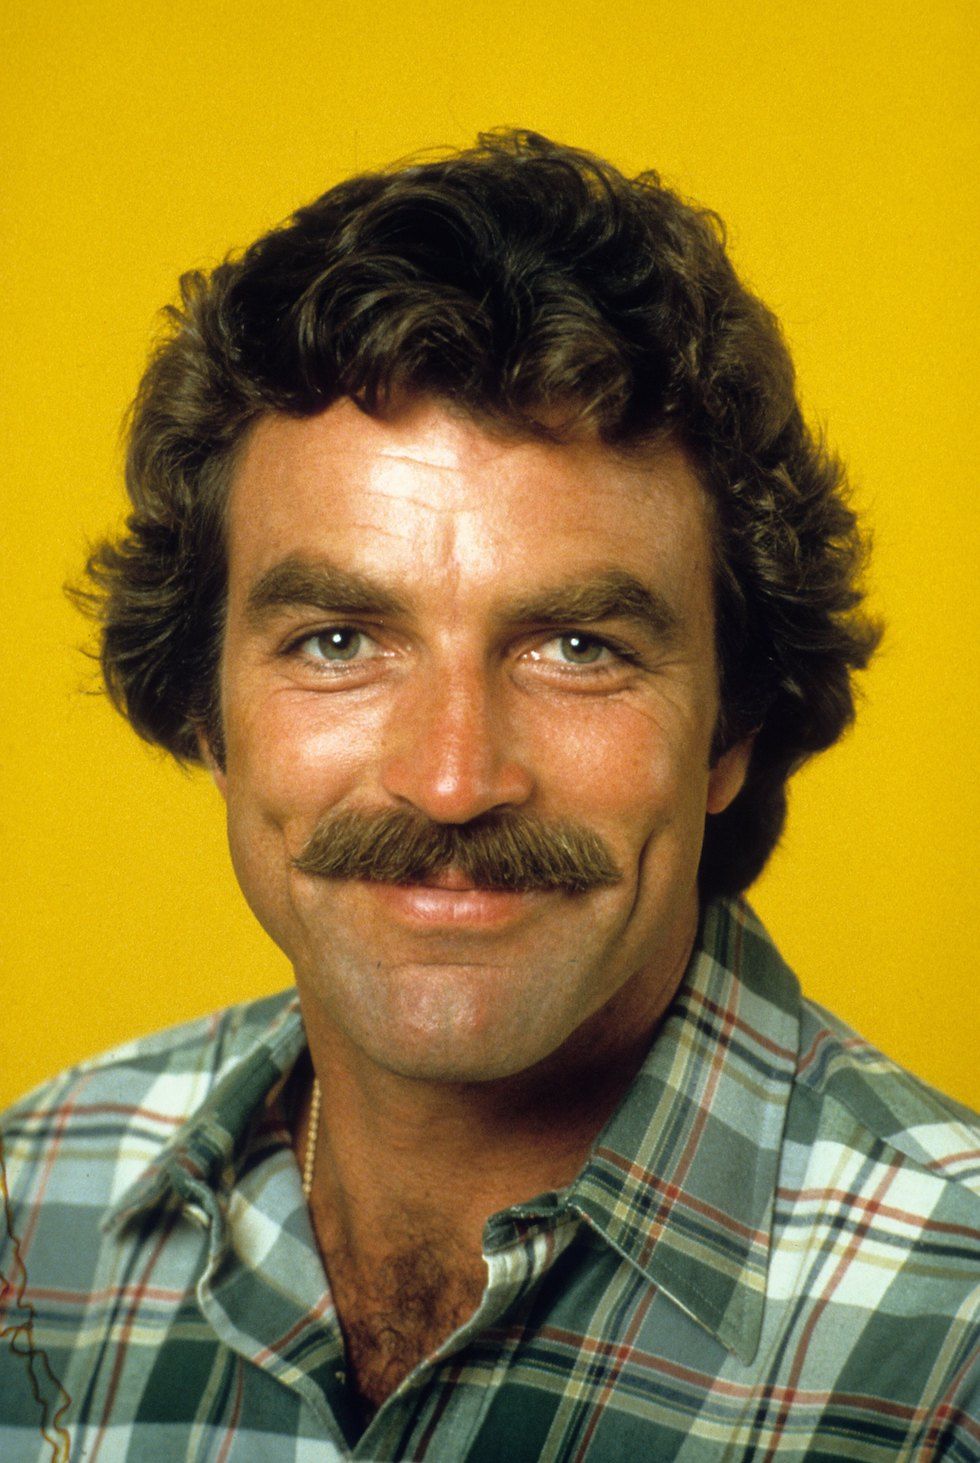 45 Pictures of Celebrity Mustaches - Celebrate Movember